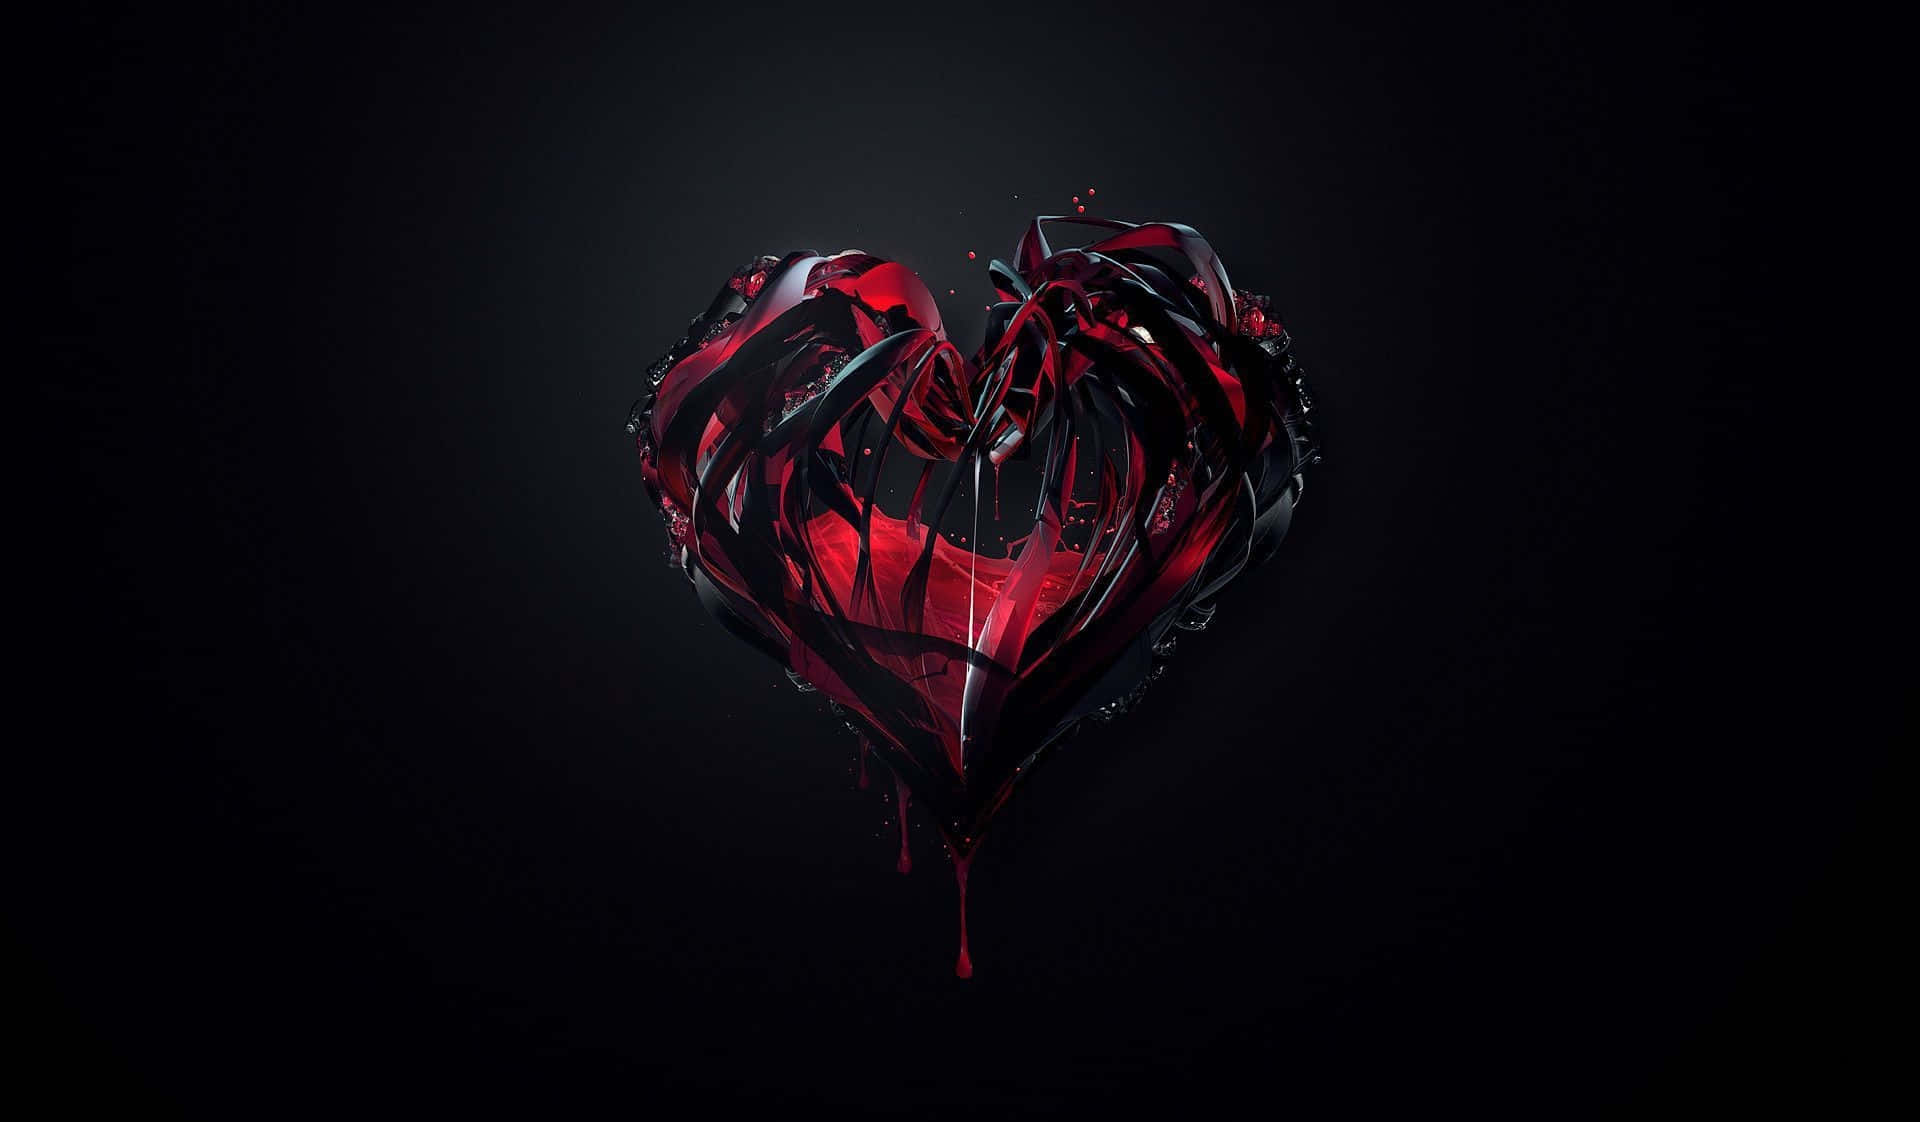 Shattered Heart on a Black Background